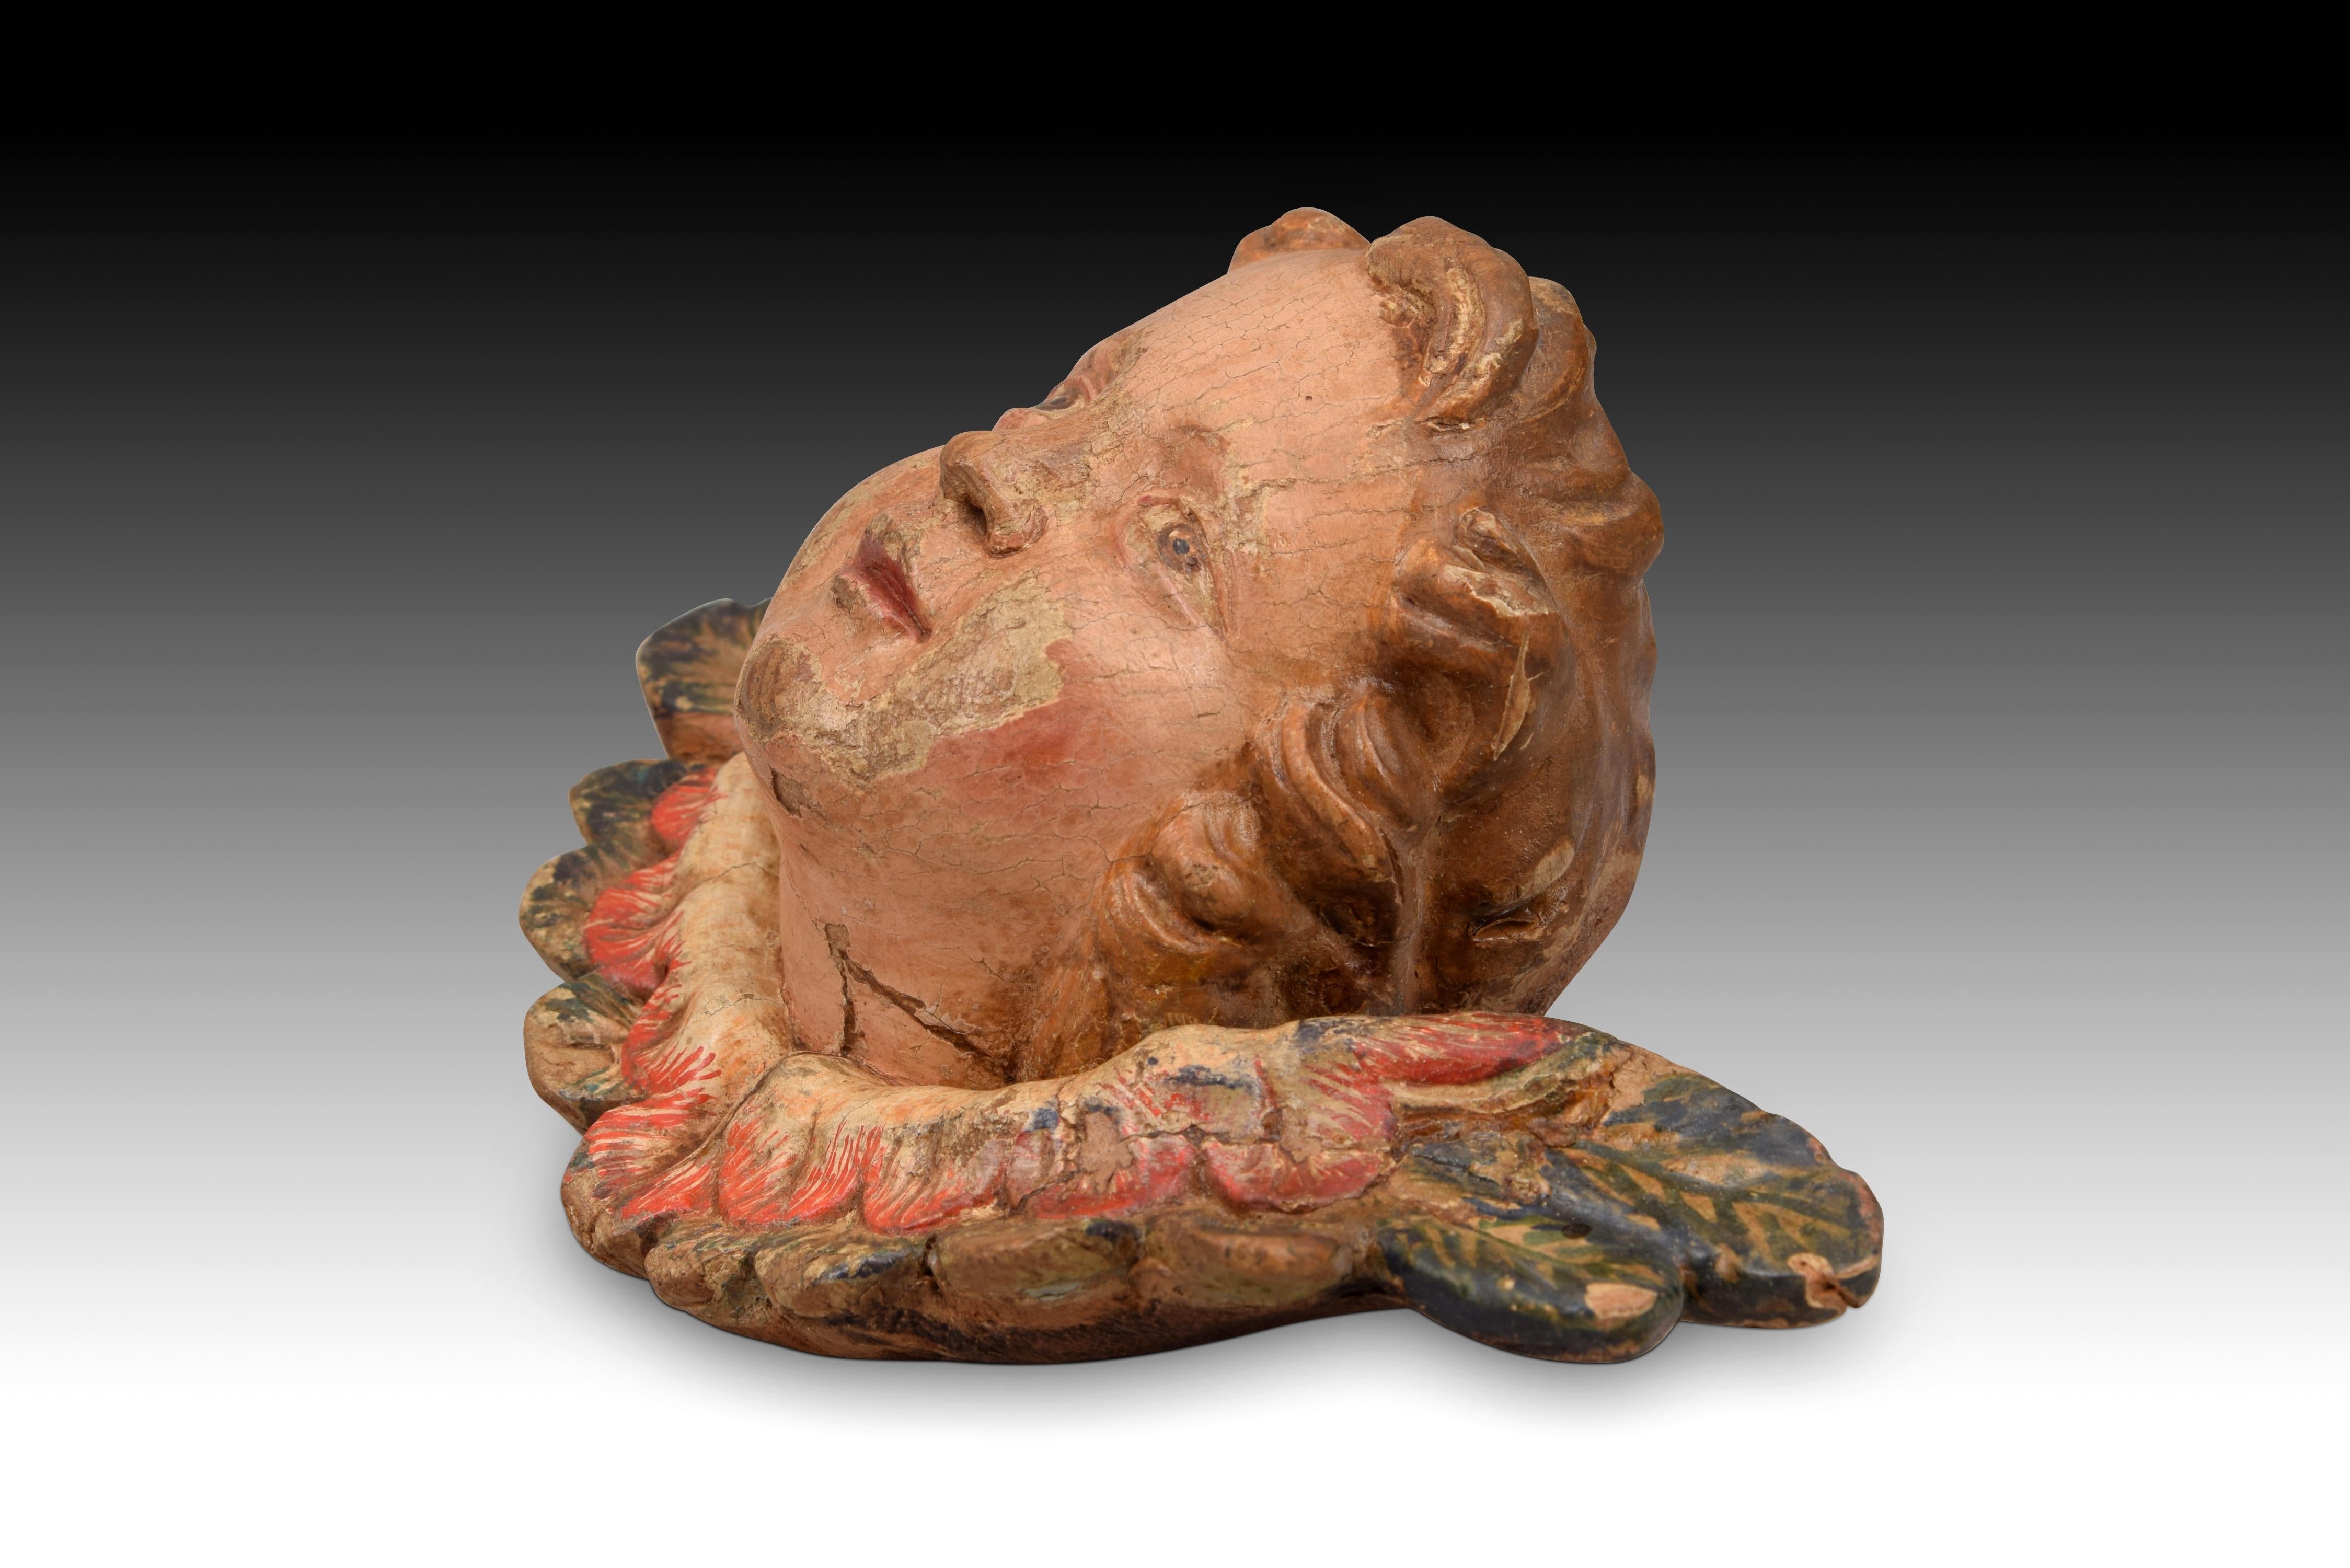 Other Pair of Angel Heads, Carved and Polychrome Wood, Spanish School, 18th Century